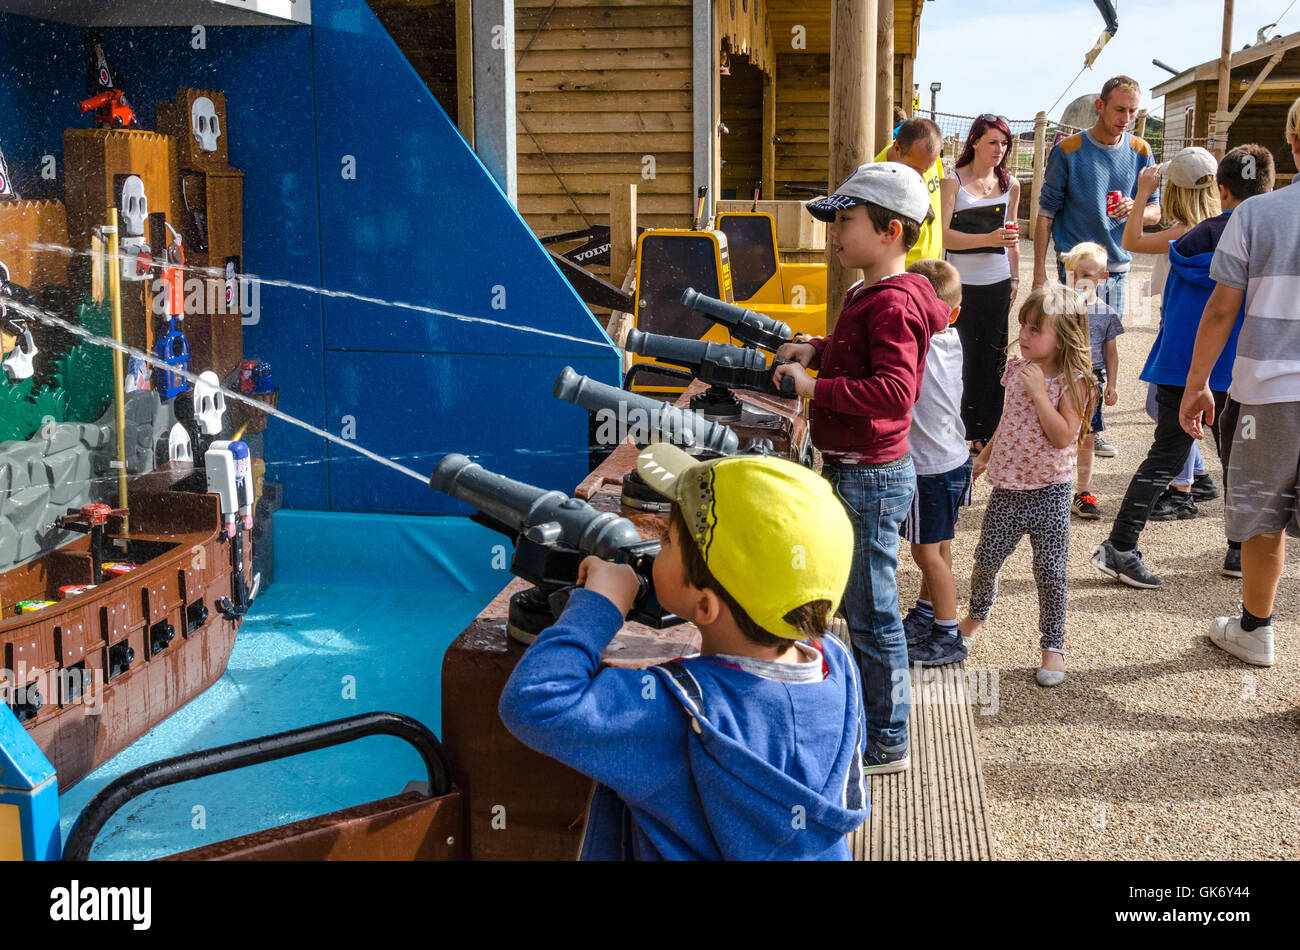 A couple of young brothers play on a water cannon shooting game at the fairground. Stock Photo